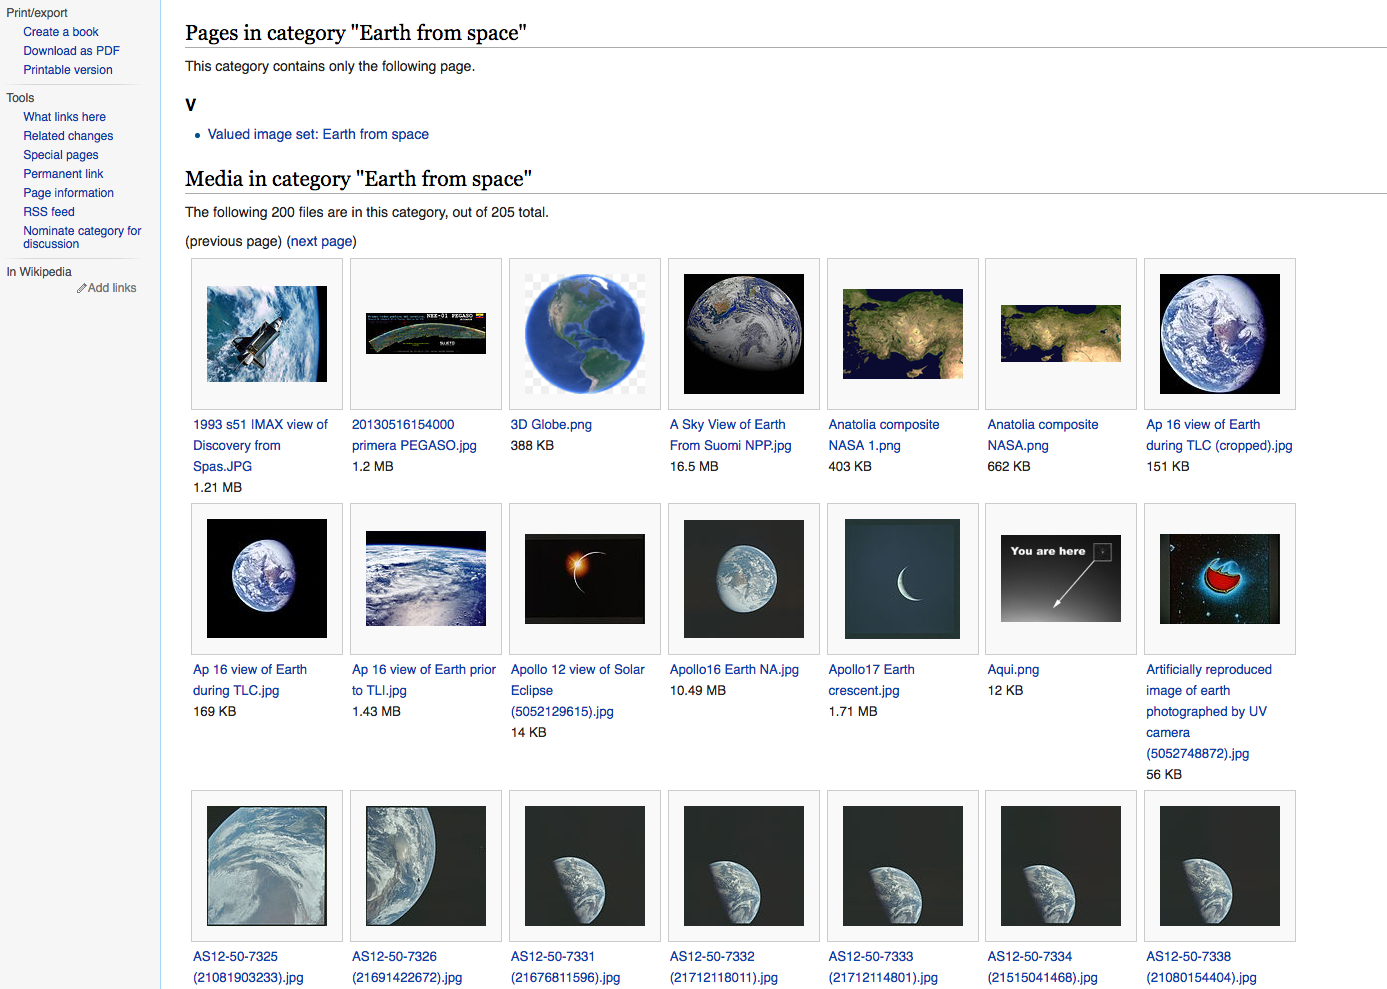 Public Domain Images at commons.wikiMedia's screenshot